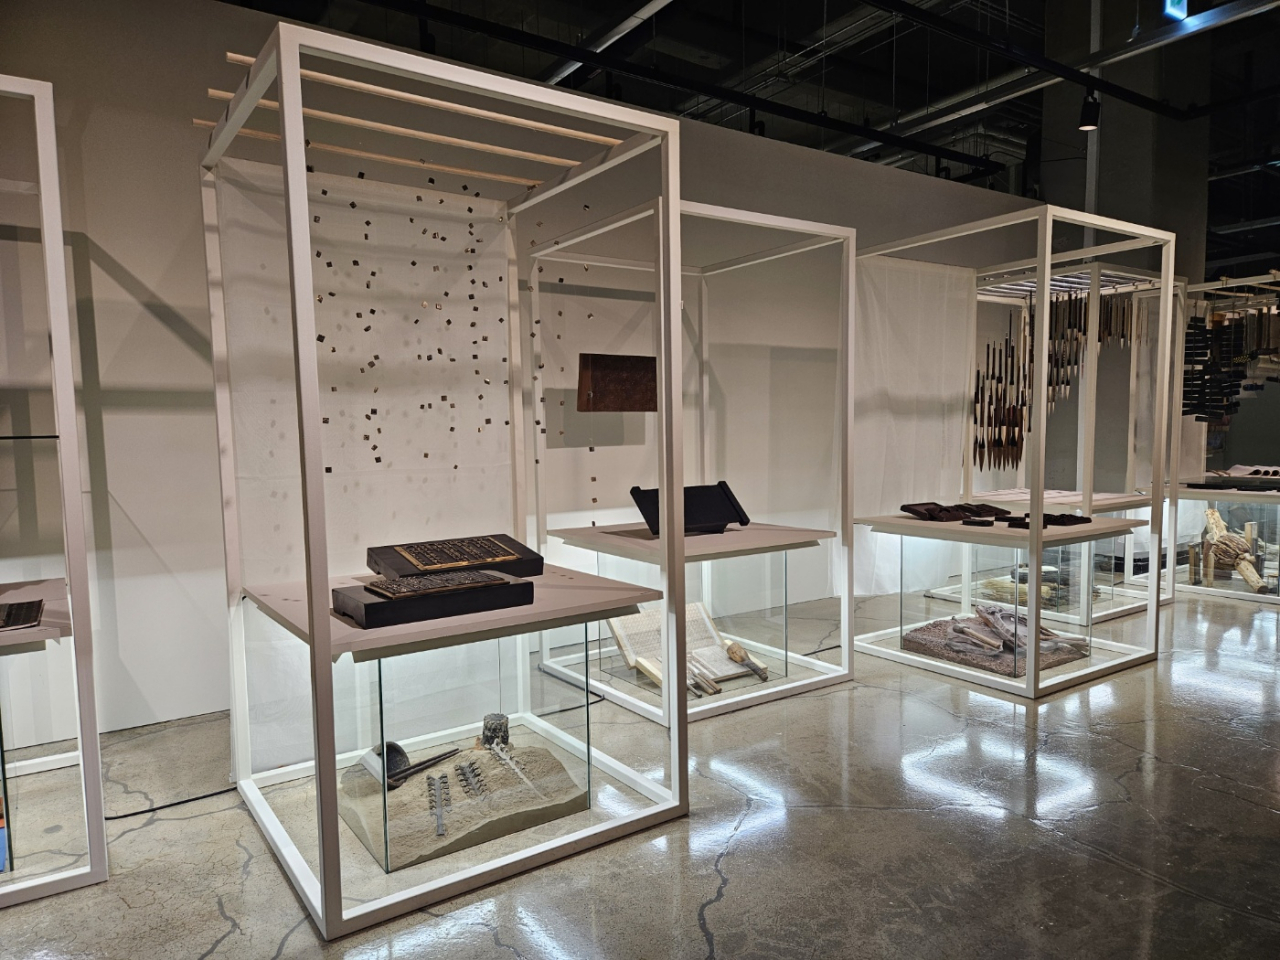 A section dedicated to master artisans of brush making, calligraphic engraving, red ocher ink stone making and producing Korean traditional paper, hanji, reflecting on the history of Jikji at the 2023 Cheongju Craft Biennale (Park Yuna/The Korea Herald)